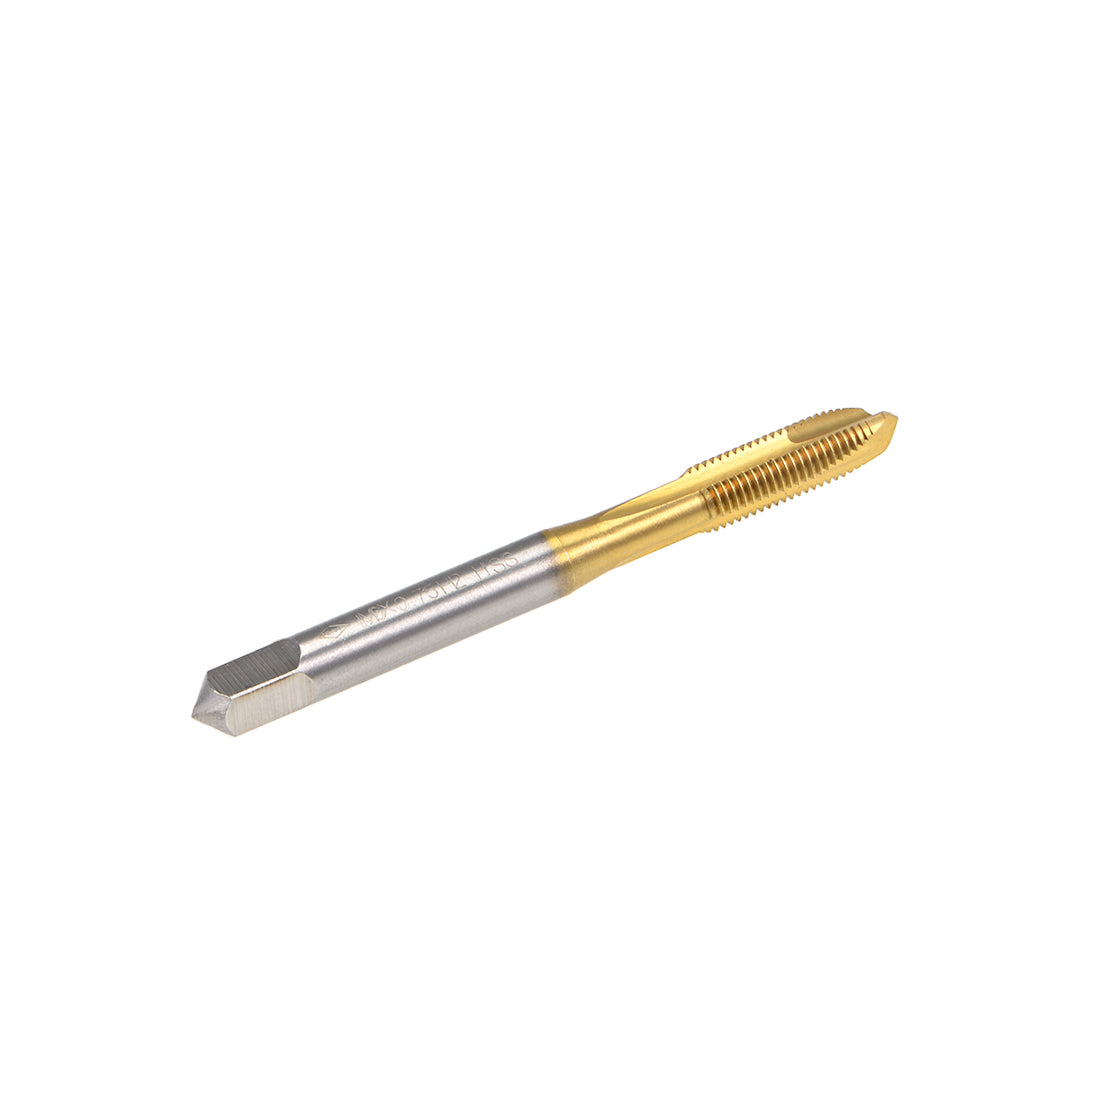 uxcell Uxcell Spiral Point Threading Tap M6 Thread 0.75 Pitch Titanium Coated HSS 2pcs